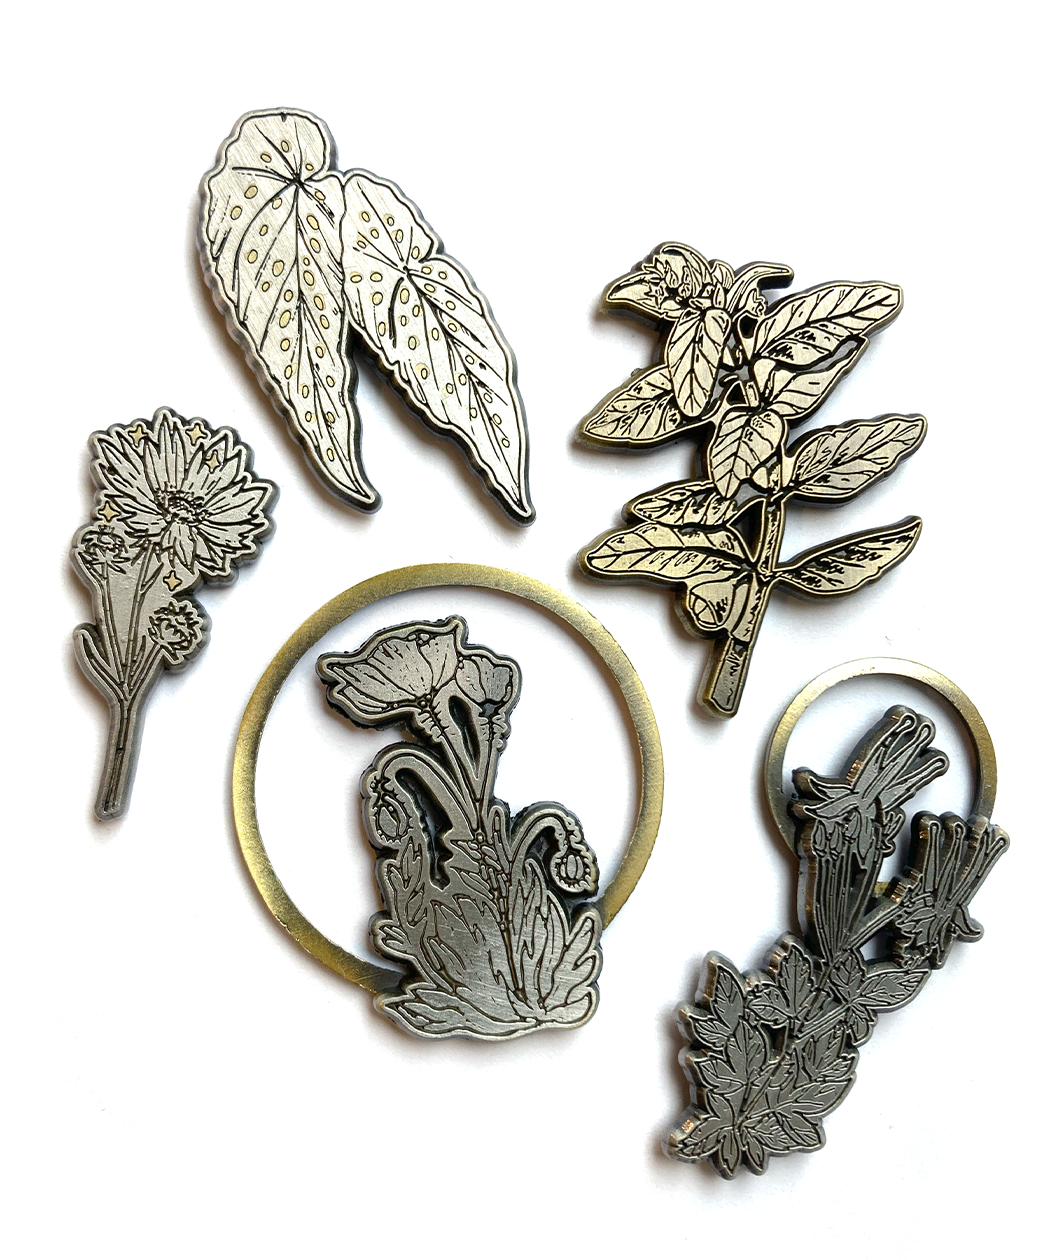 A collection of gold and silver botanical pins from Tyler Thrasher.